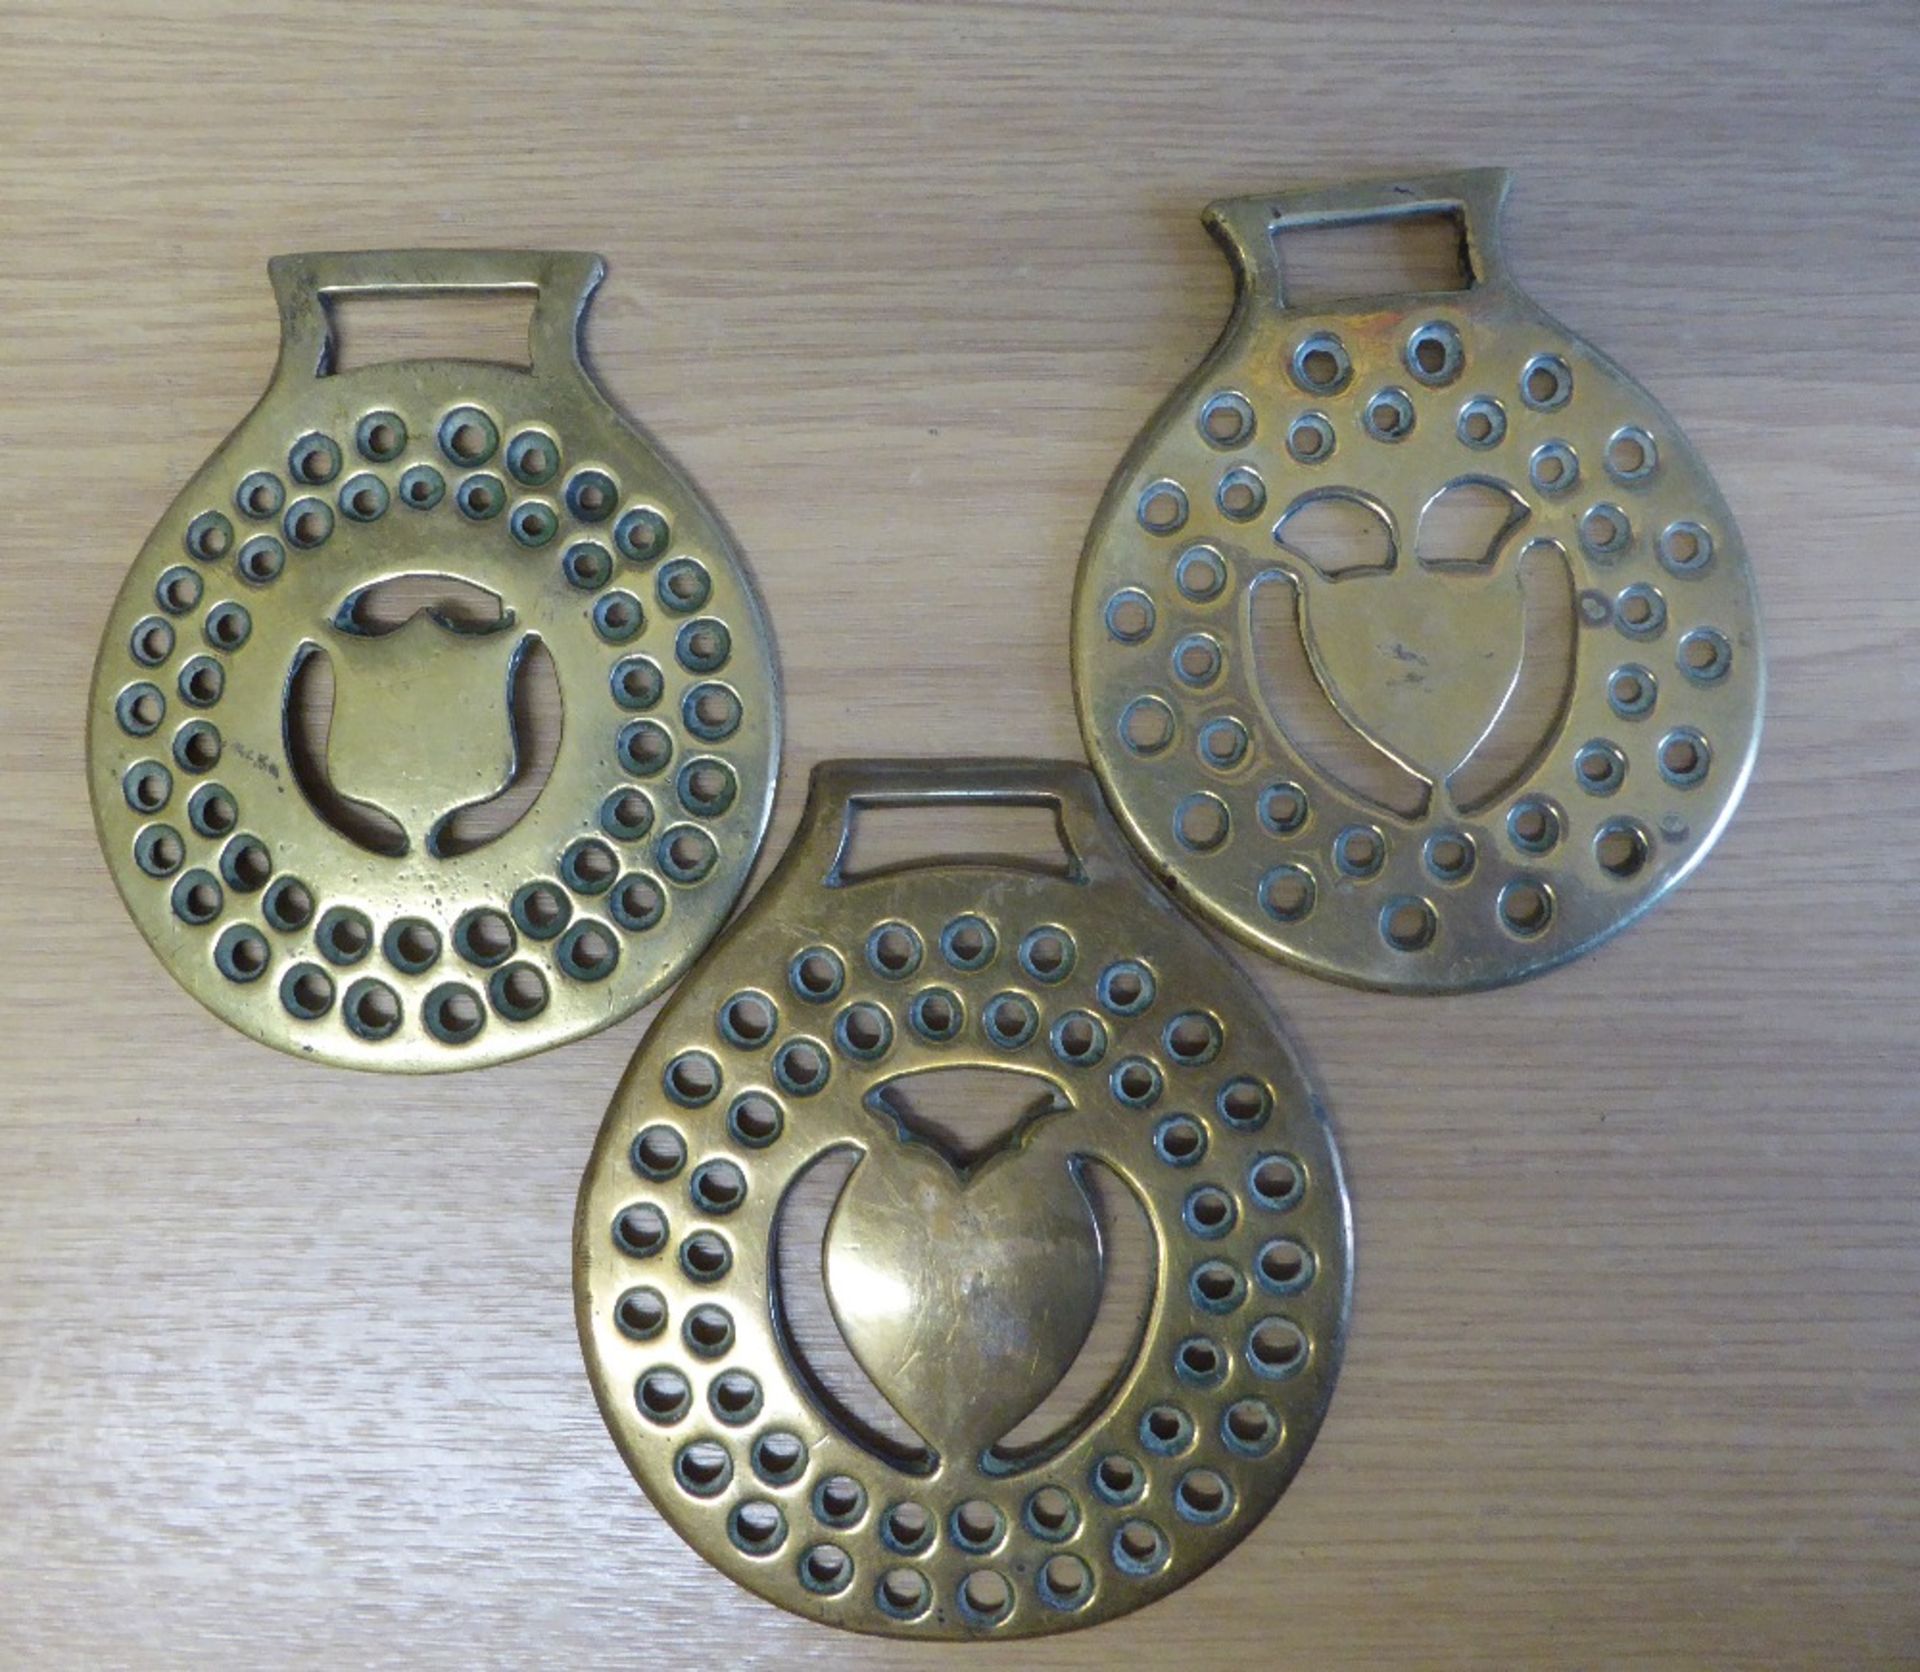 1 heart centre cast brass and 2 stamped with shield centres